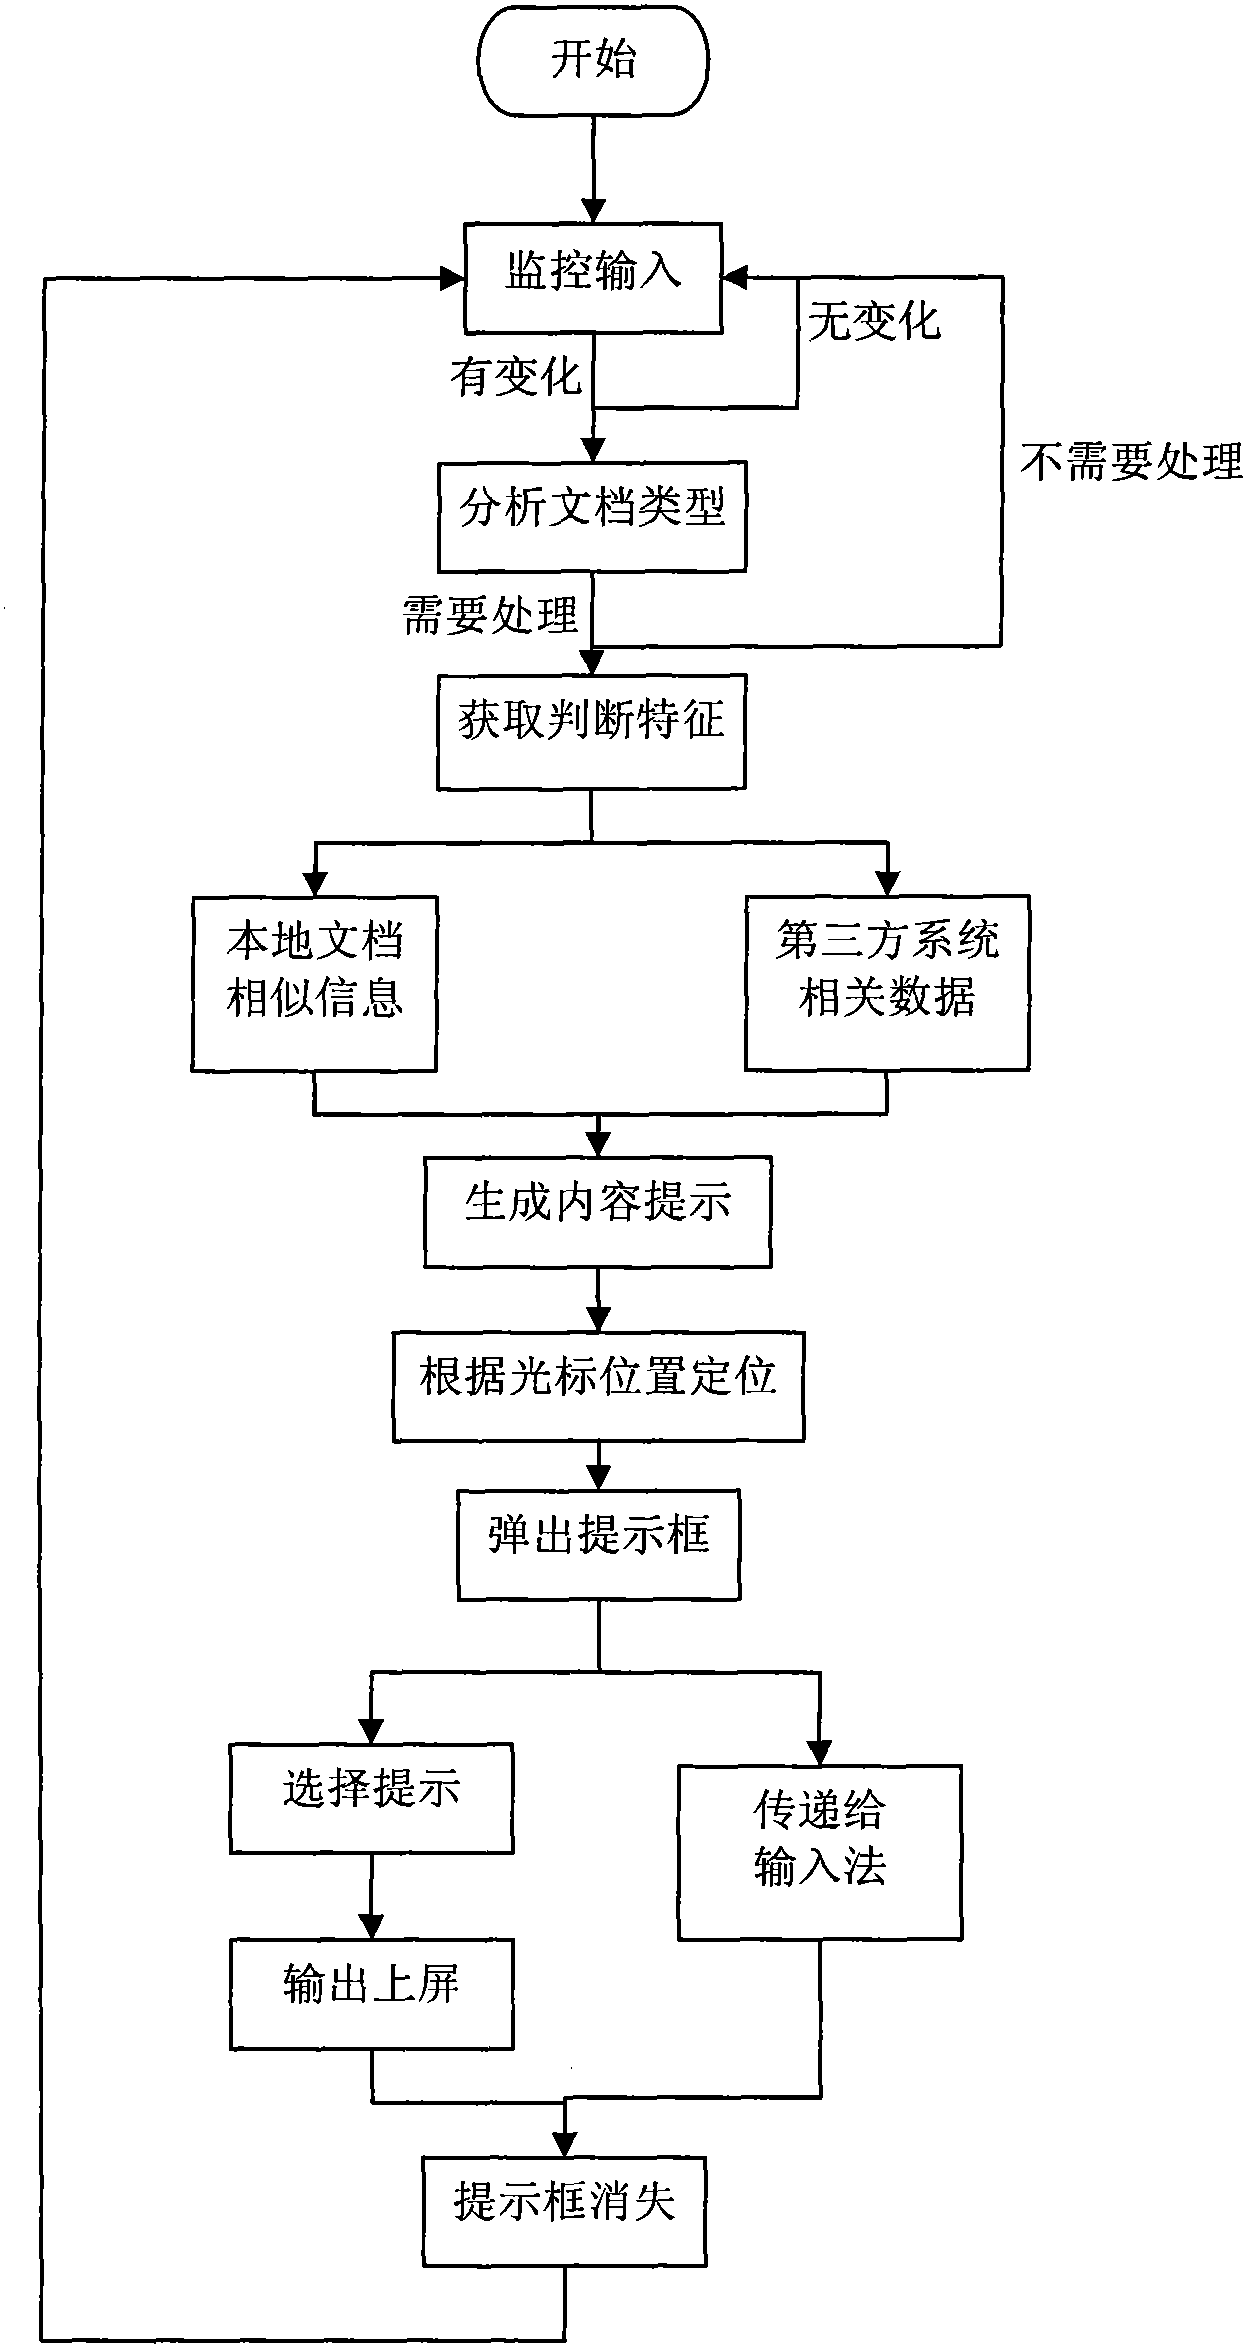 Real-time learning-based auxiliary word writing system and method